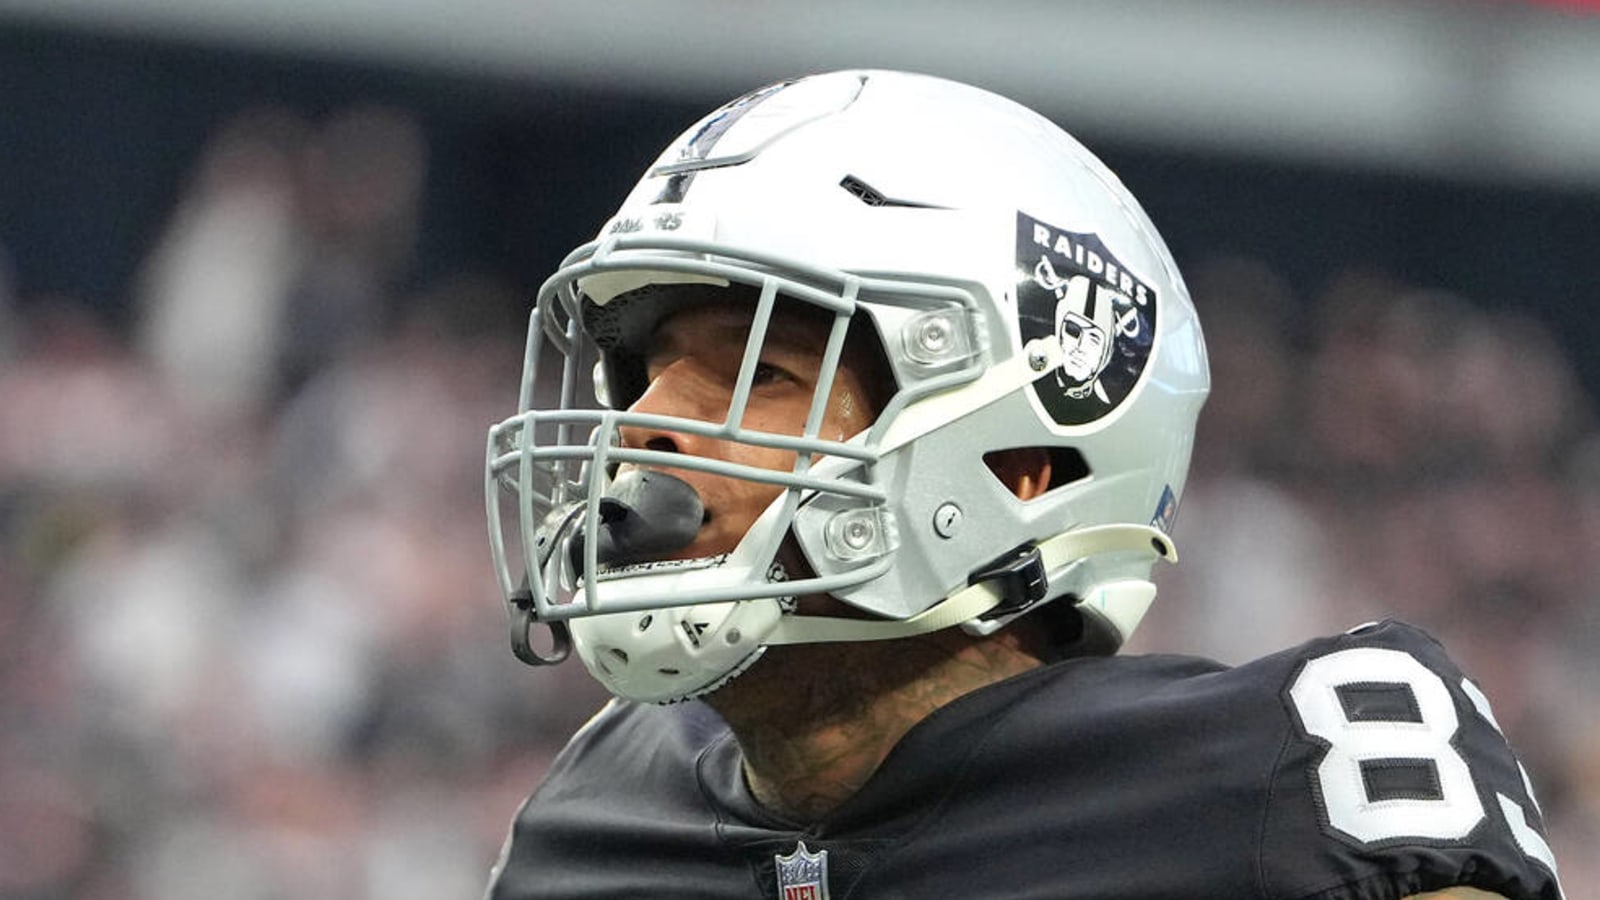 Raiders are sending mixed signals with offseason moves